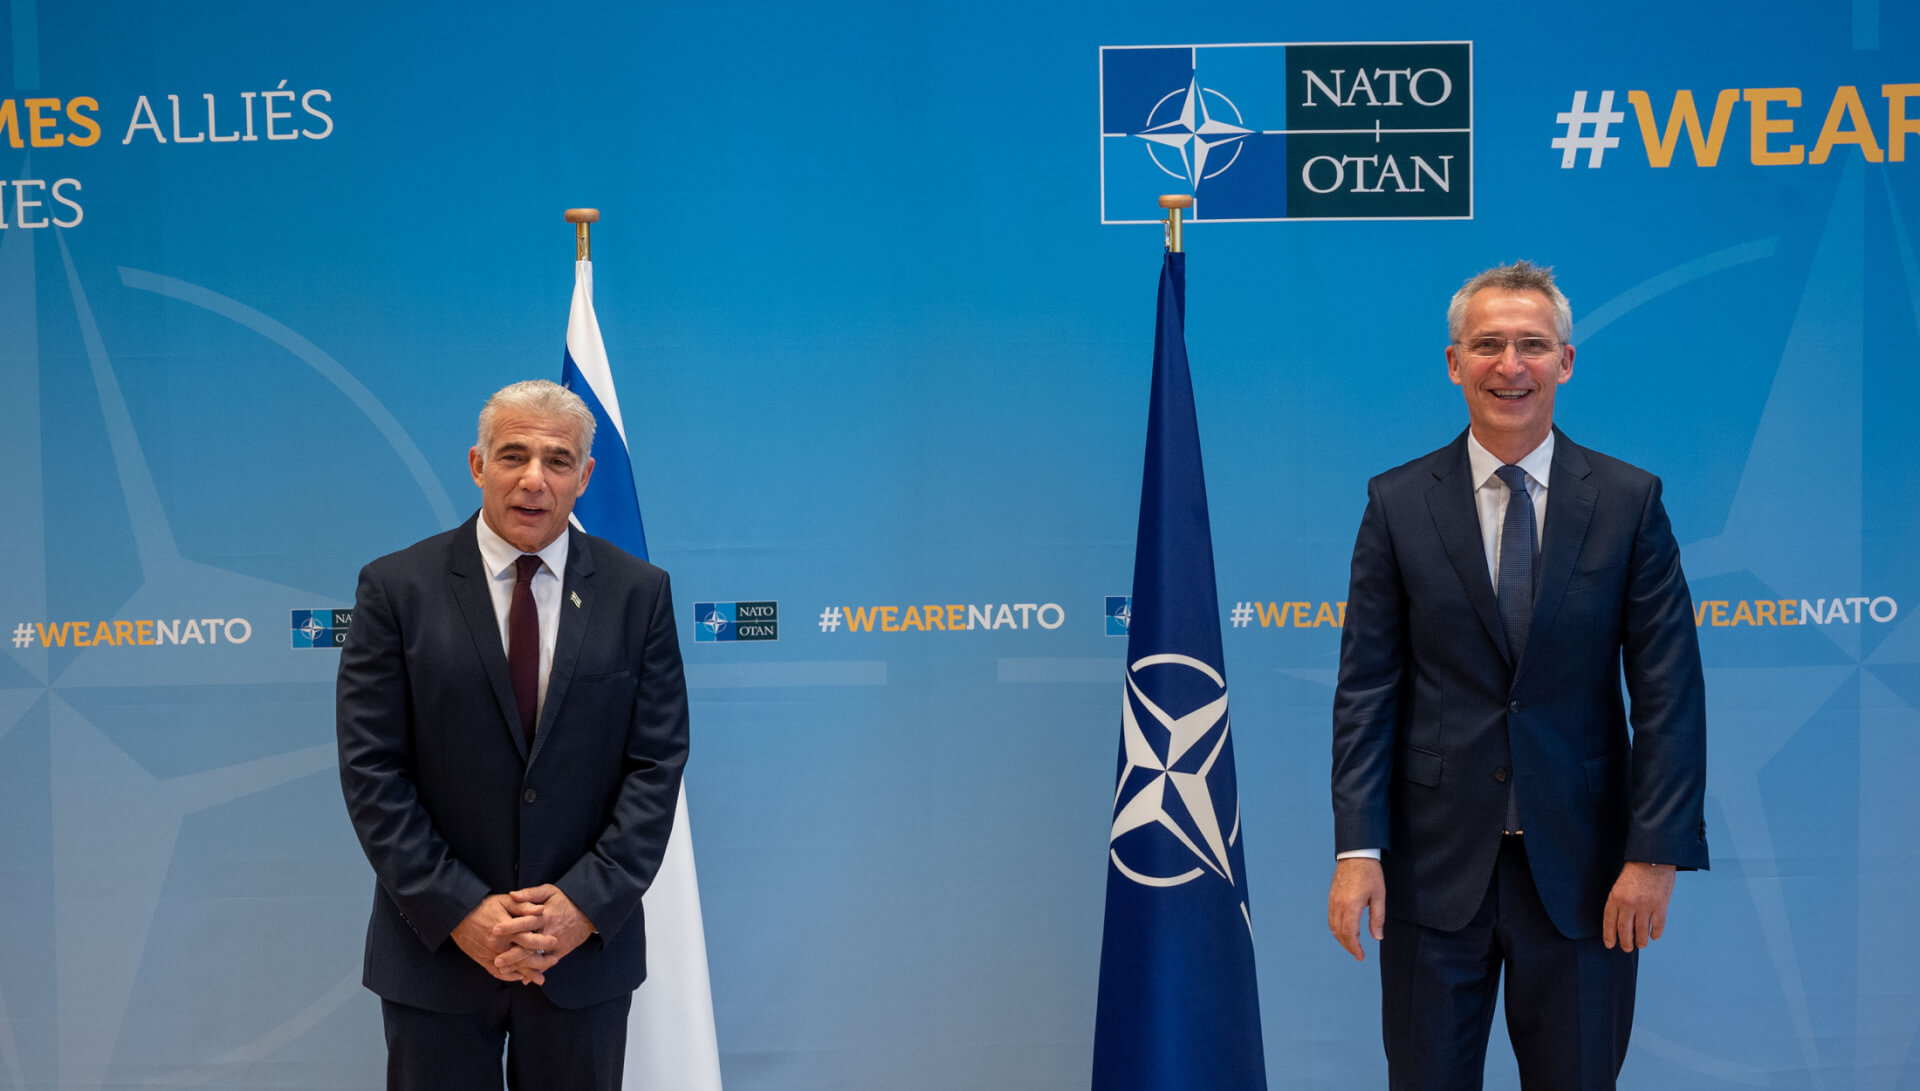 Israel FM Lapid Meets NATO, EU Leaders to Discuss Iran, Defence, and Regional Security